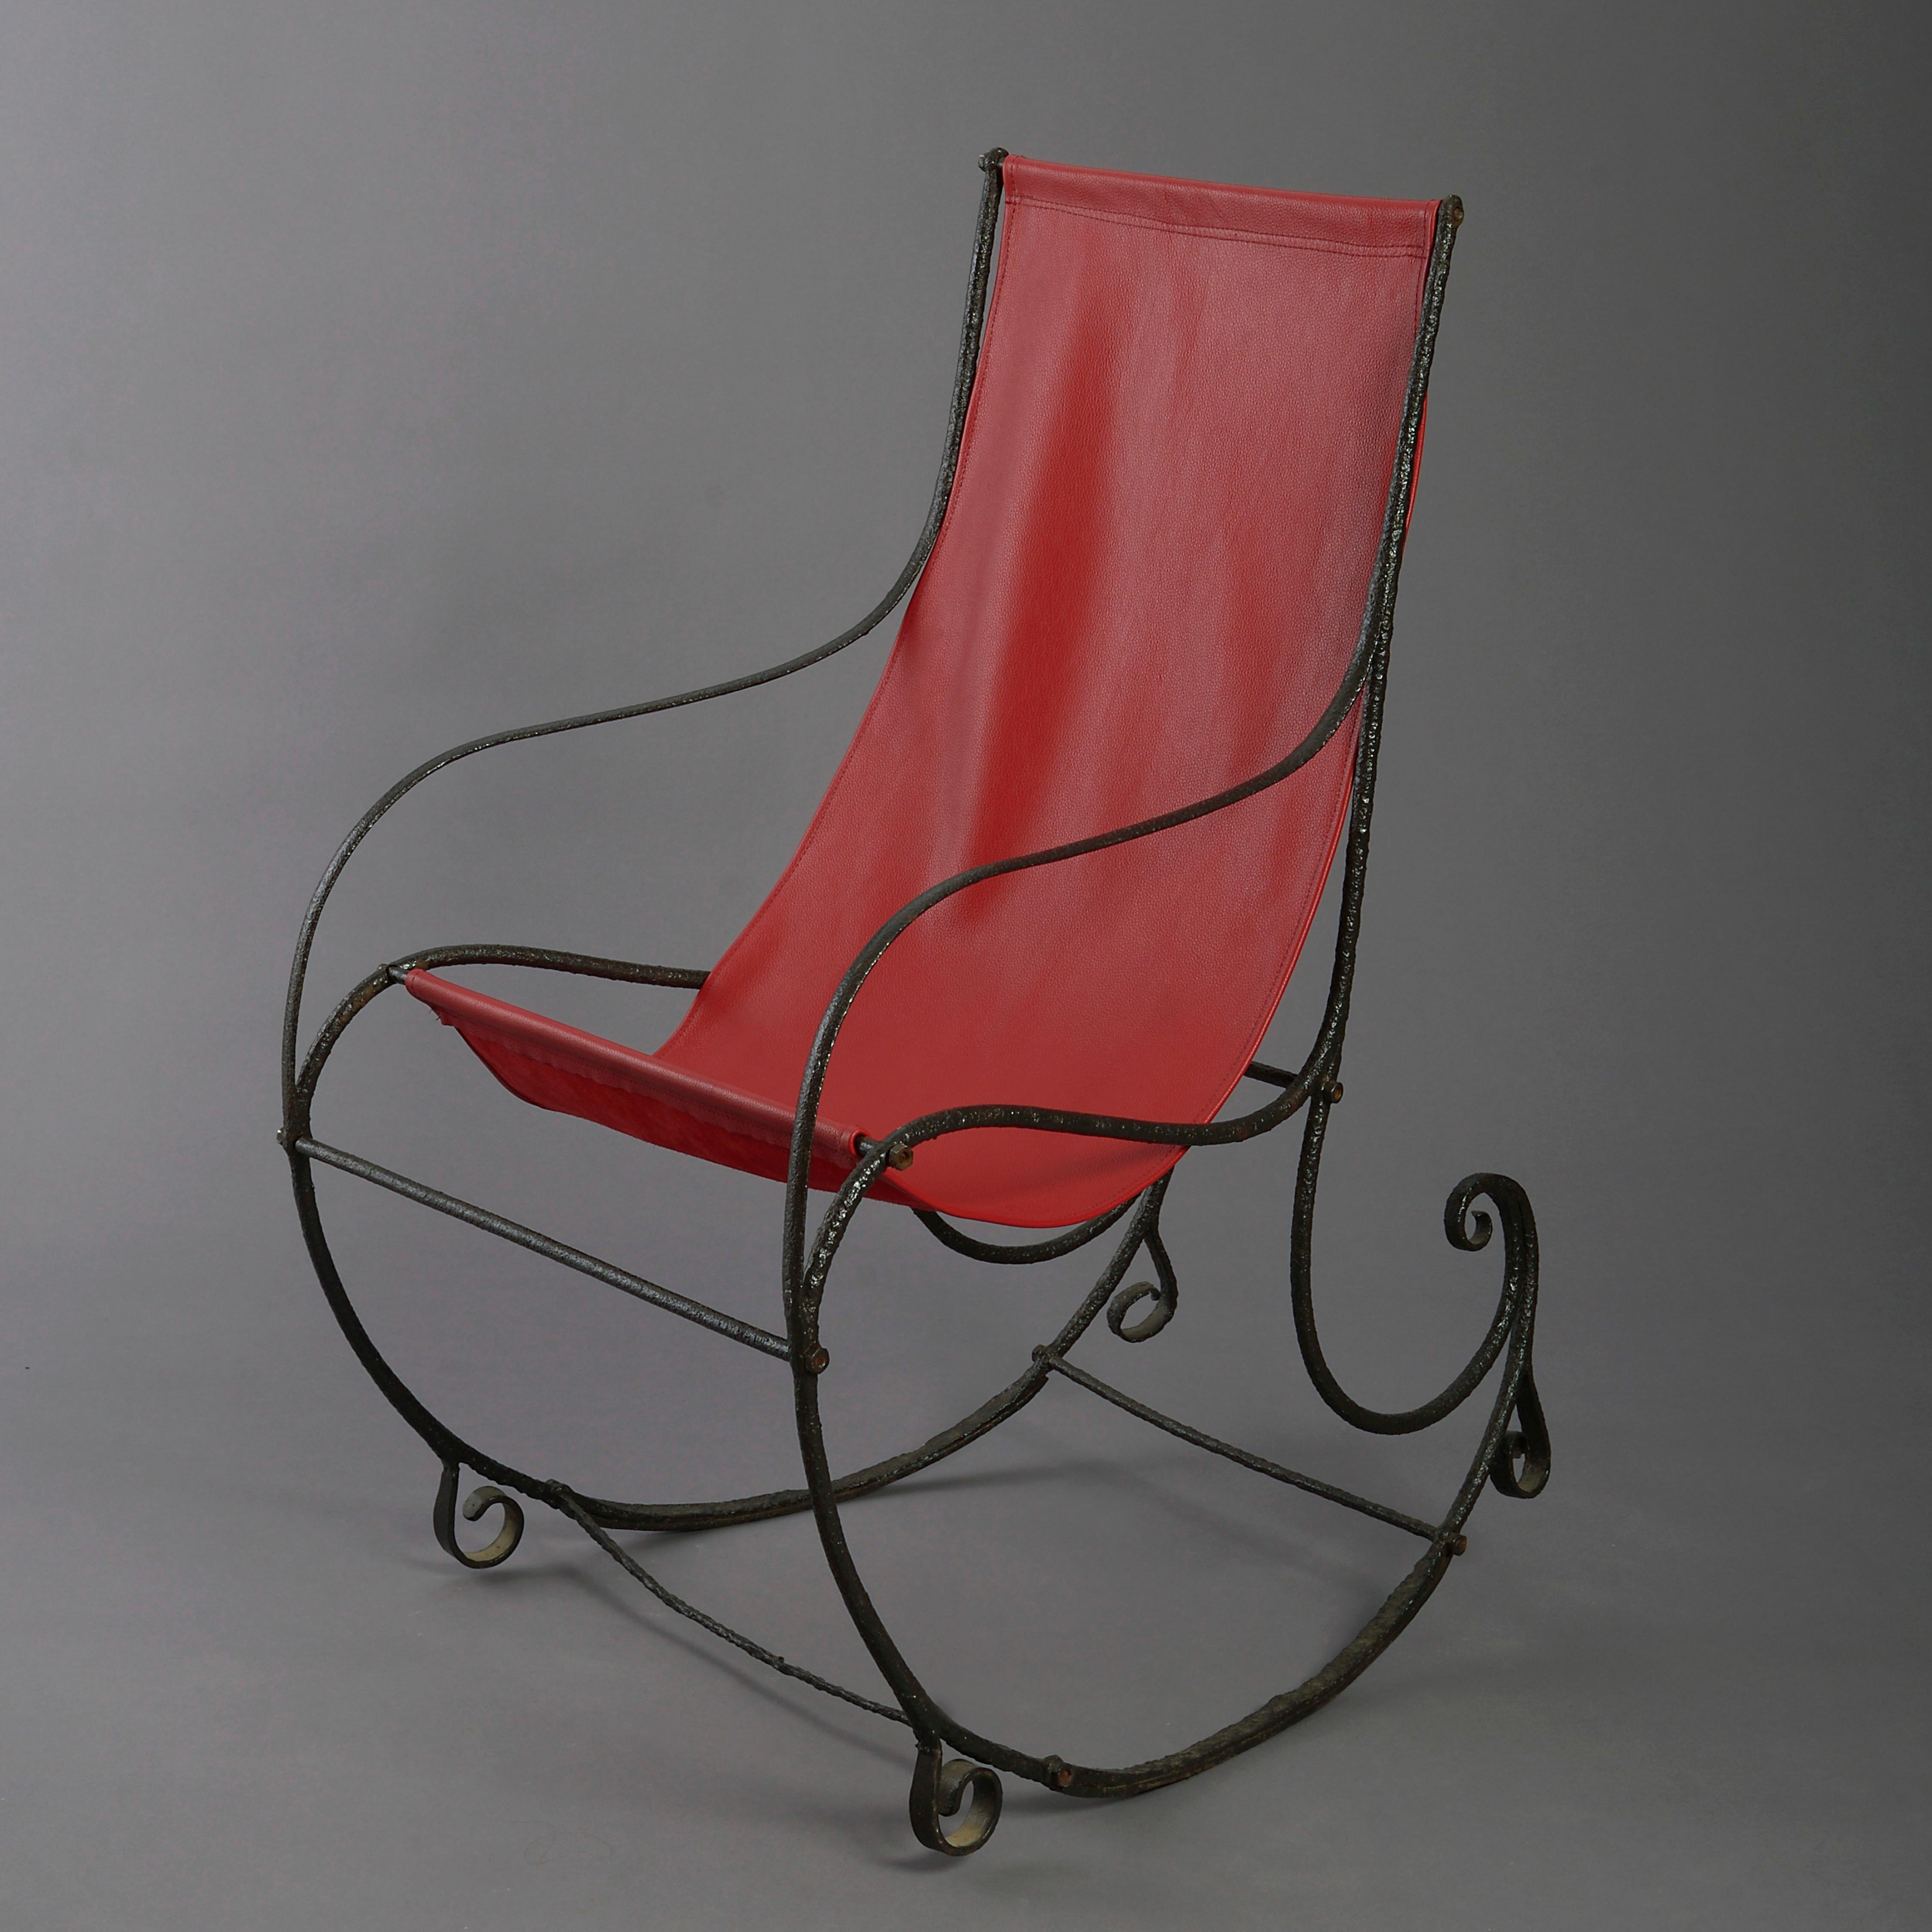 A Regency period cast iron rocking chair, having a rectangular back, with wrought iron scrolls to the arms and base. With red leather seat.